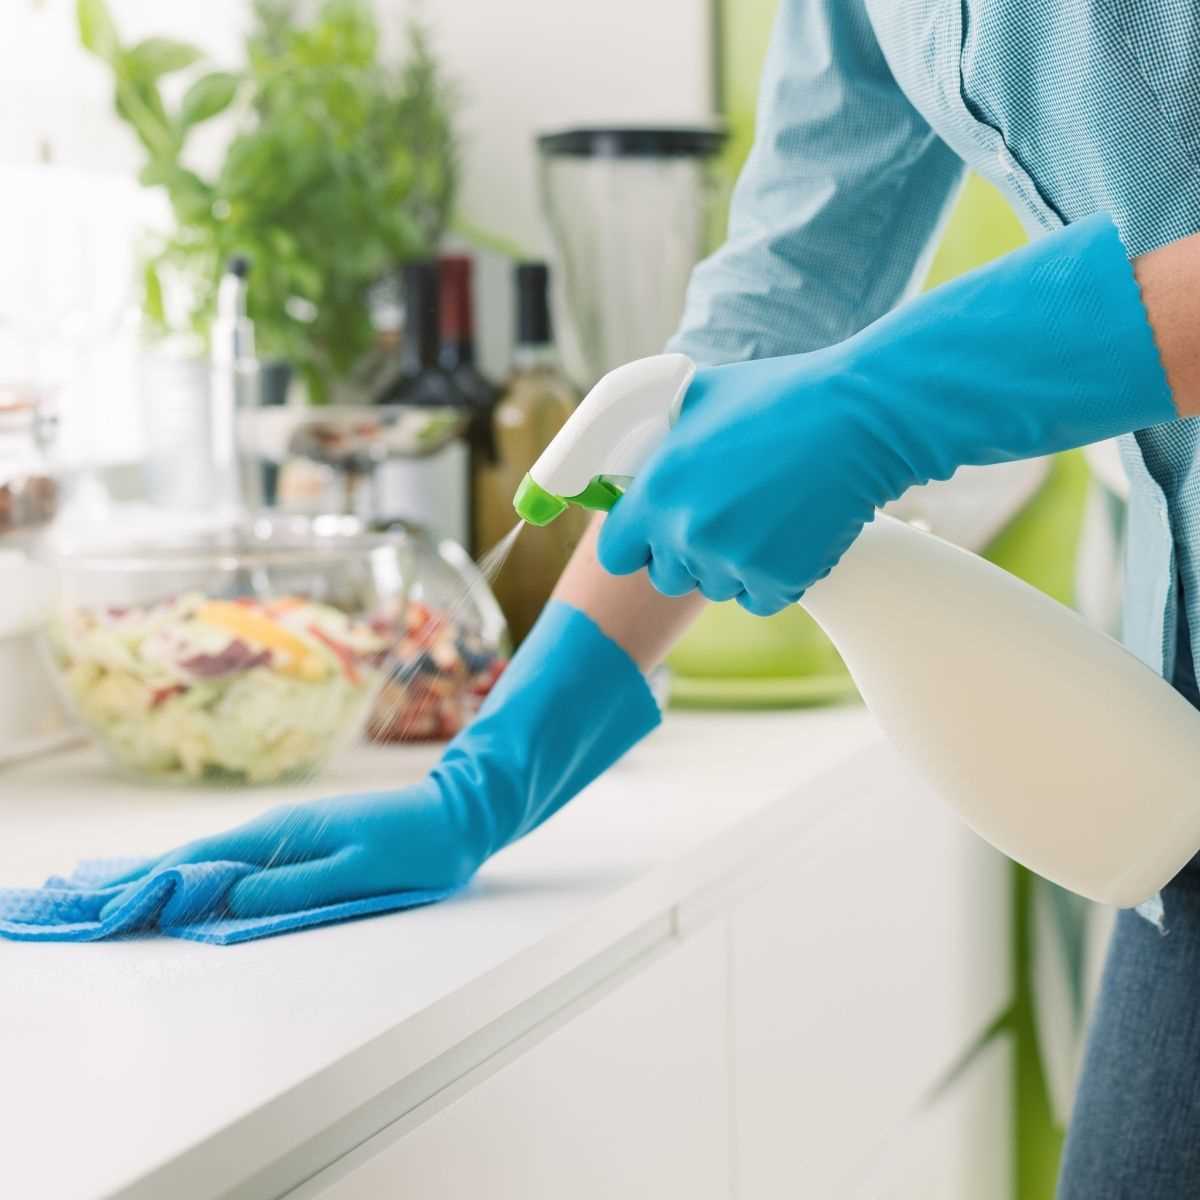 9. Maintain Regular Cleaning Routine